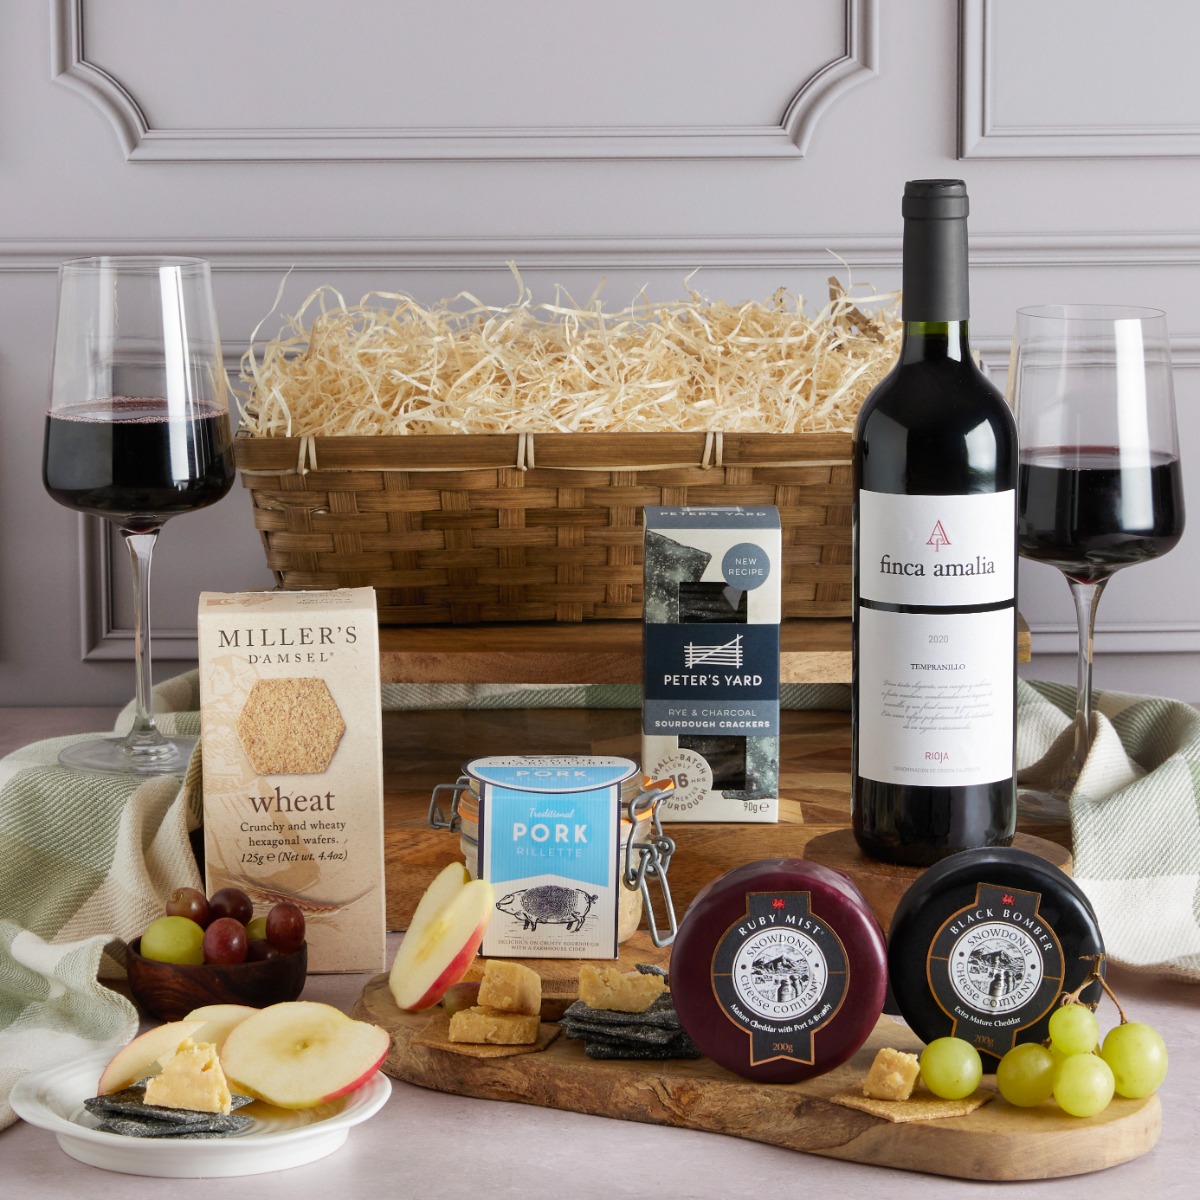 Father's Day Wine, Cheese & Rillette Gift box, with contents on display